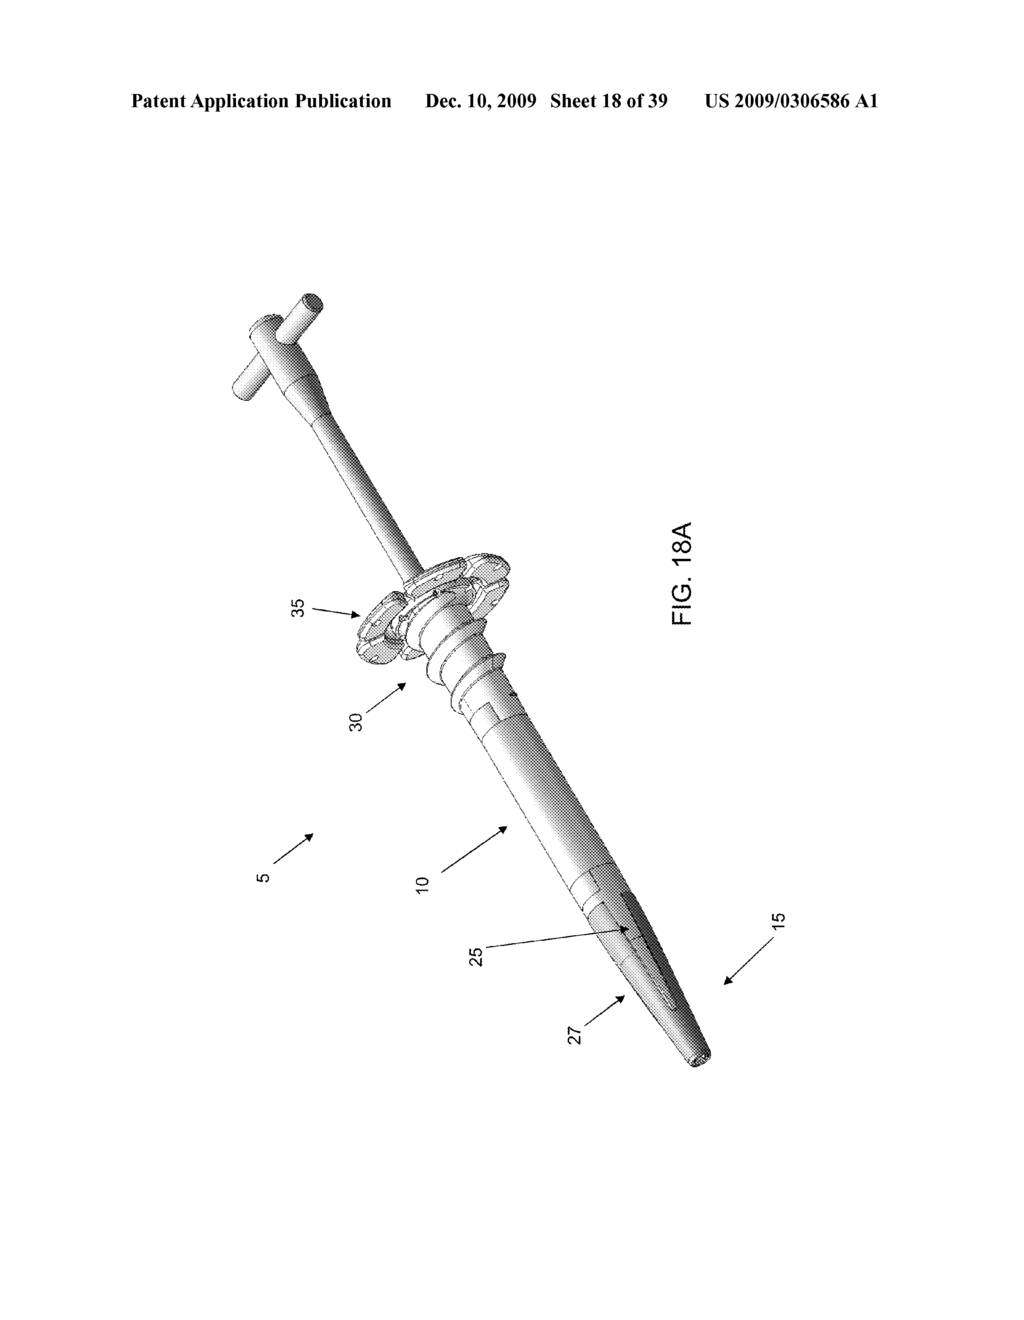 LATERALLY-EXPANDABLE ACCESS CANNULA FOR ACCESSING THE INTERIOR OF A HIP JOINT - diagram, schematic, and image 19